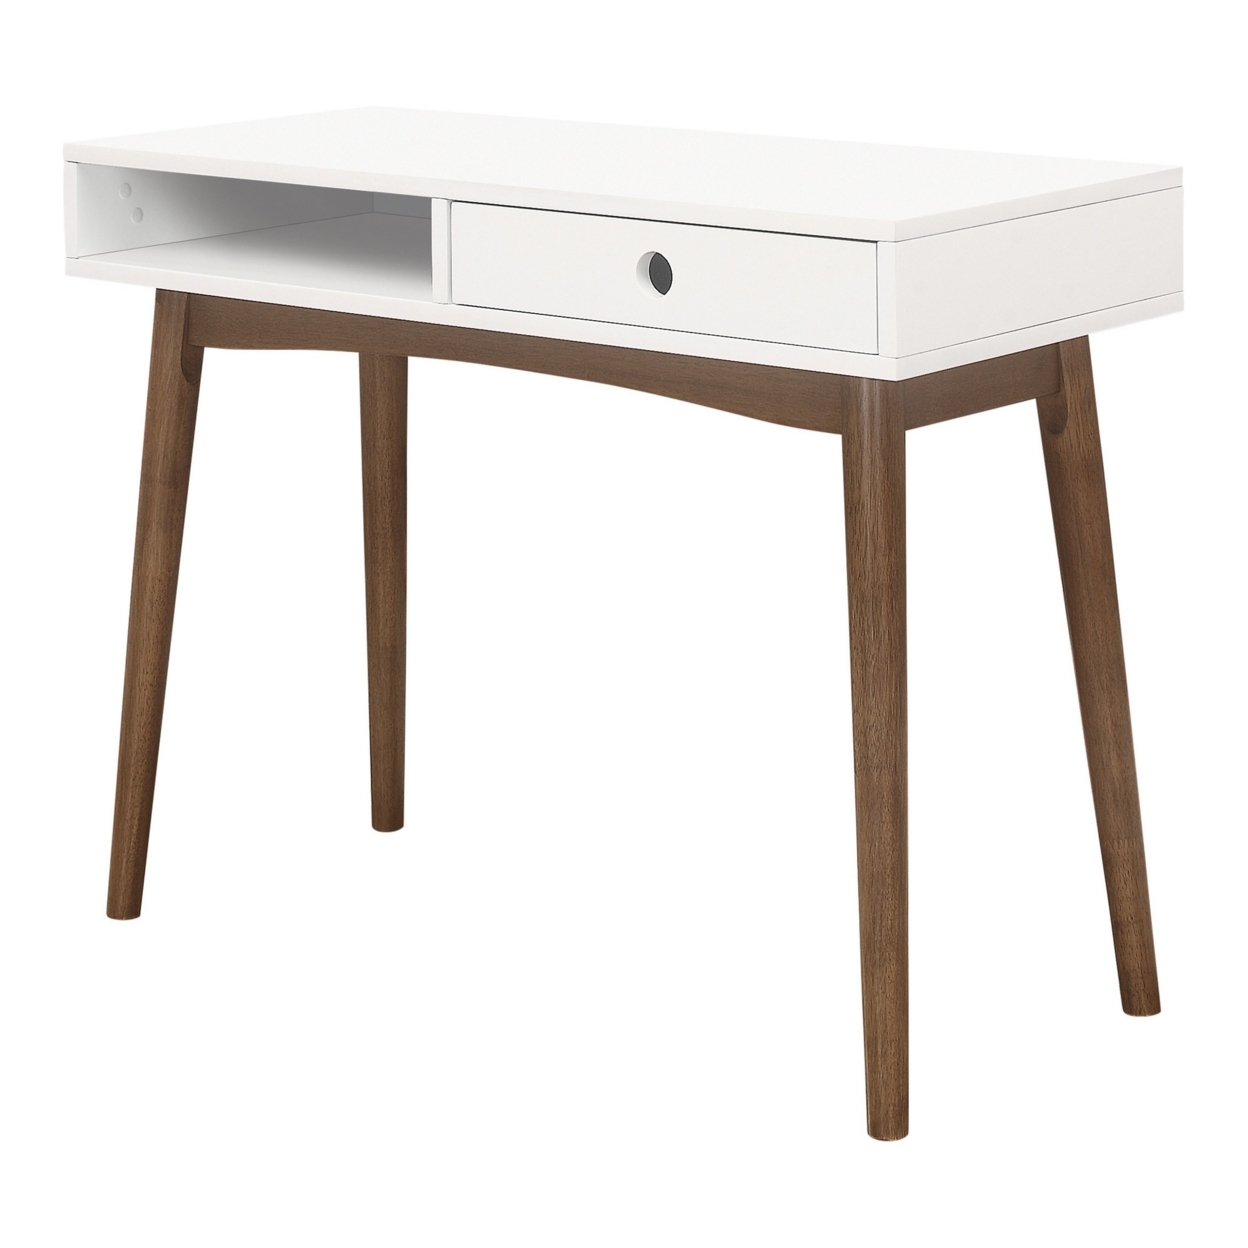 Writing Desk With 1 Drawer And 1 Compartment, White And Brown- Saltoro Sherpi